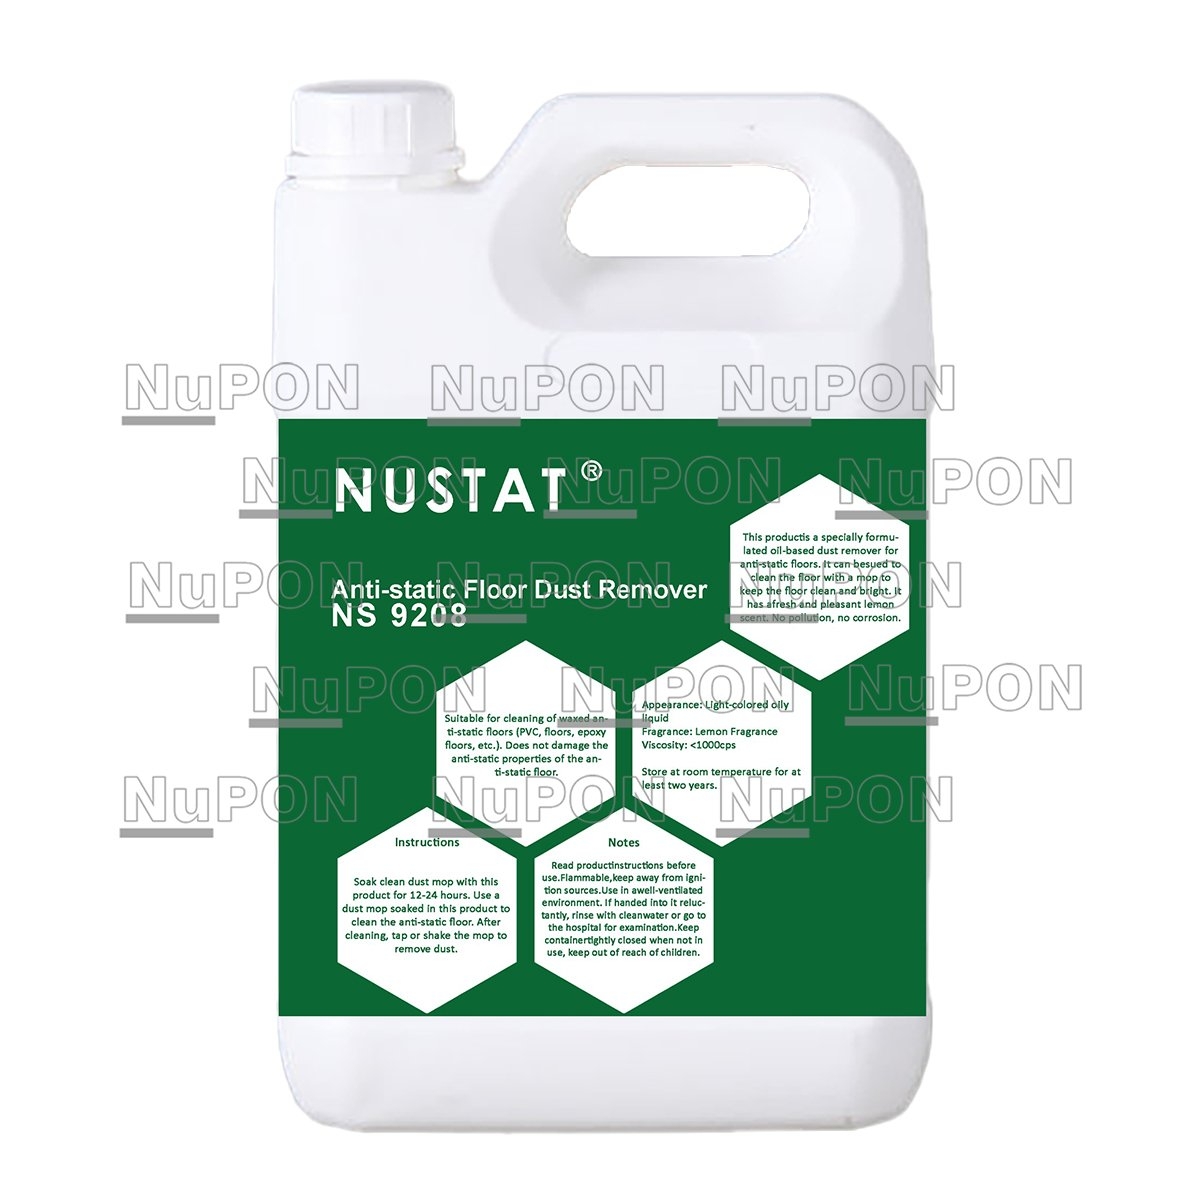 Anti-Static Floor Dust Remover NS 9208